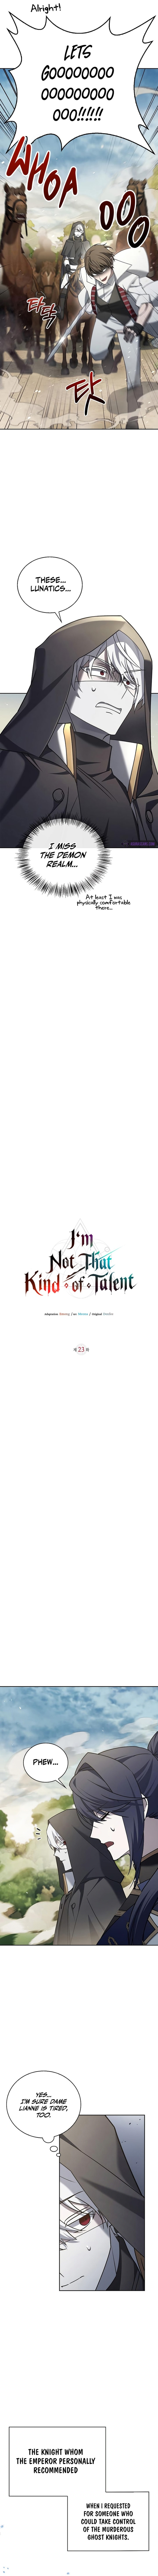 Im Not That Kind Of Talent Chapter 23 Page 4